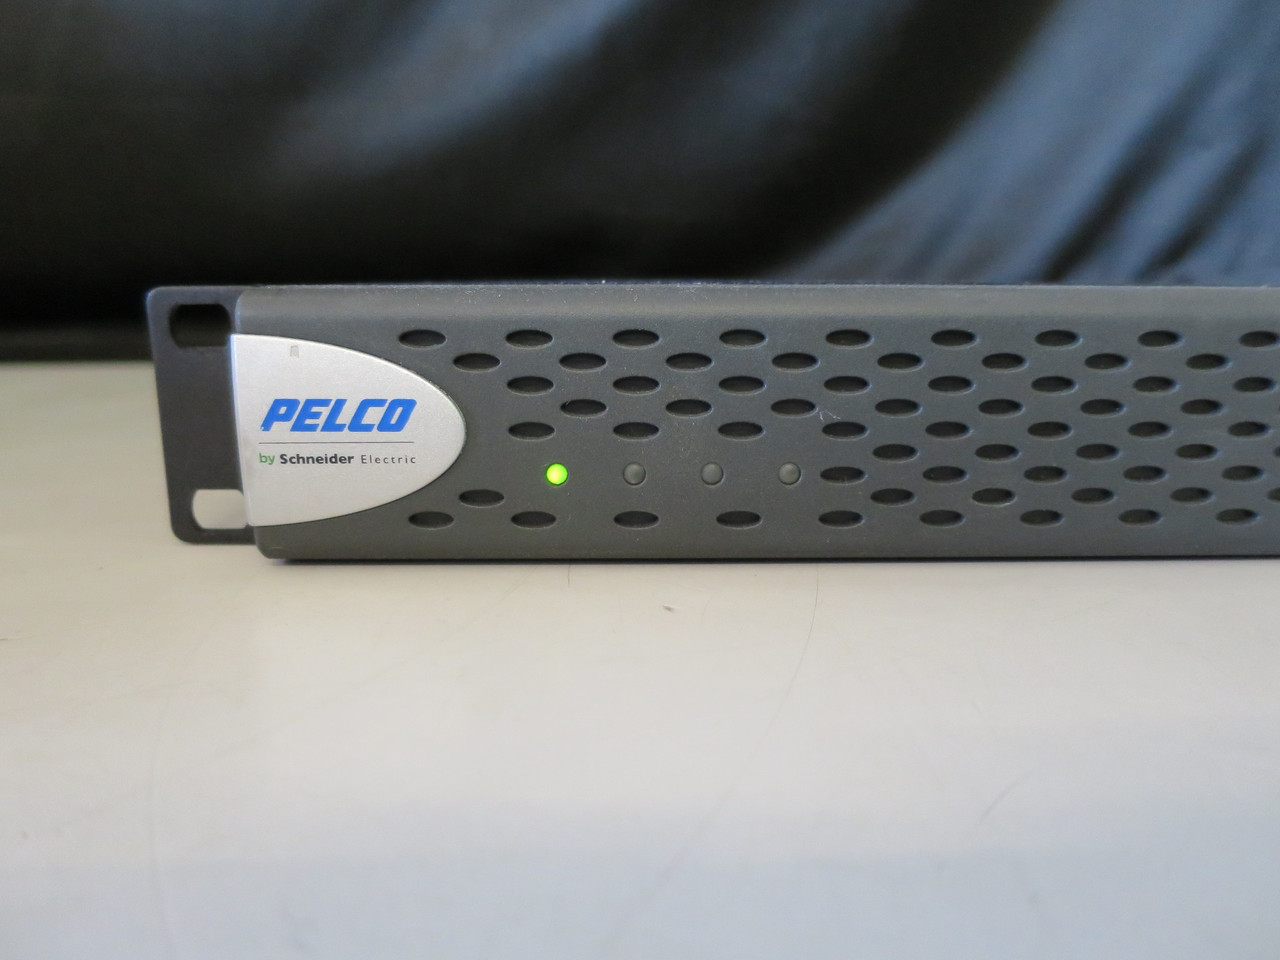 Pelco ENC5416 H.264 Direct-attached Video Encoder